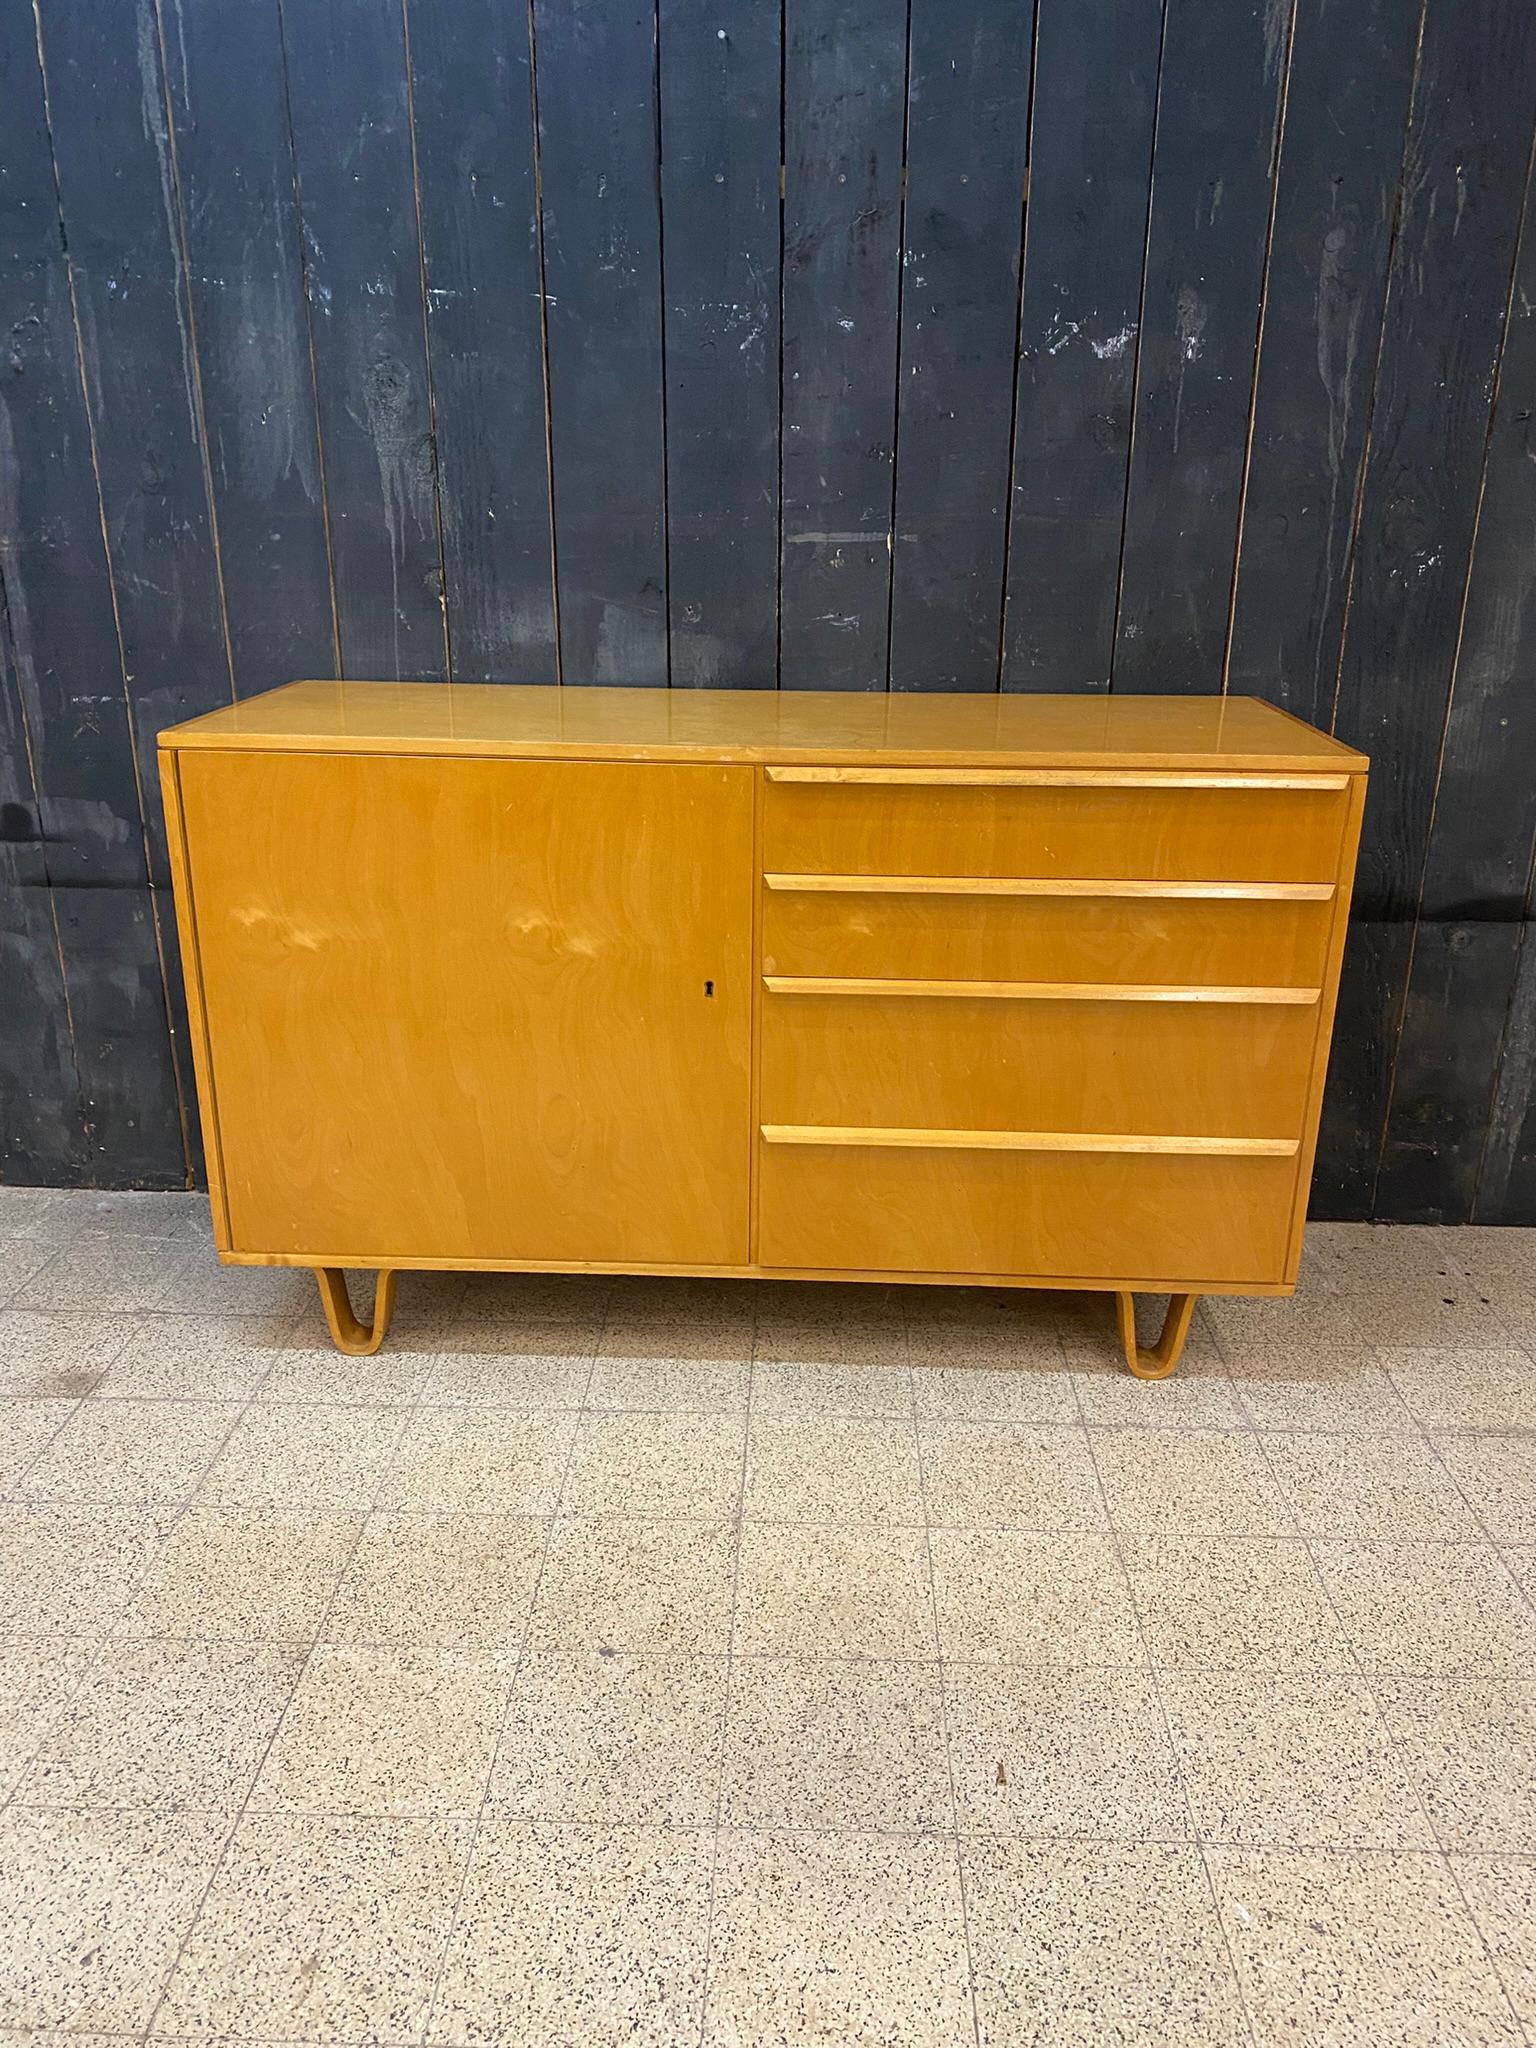 Cees Braackman for Editions Pastoe small sideboard, circa 1950.
VARNISH TO REDO.